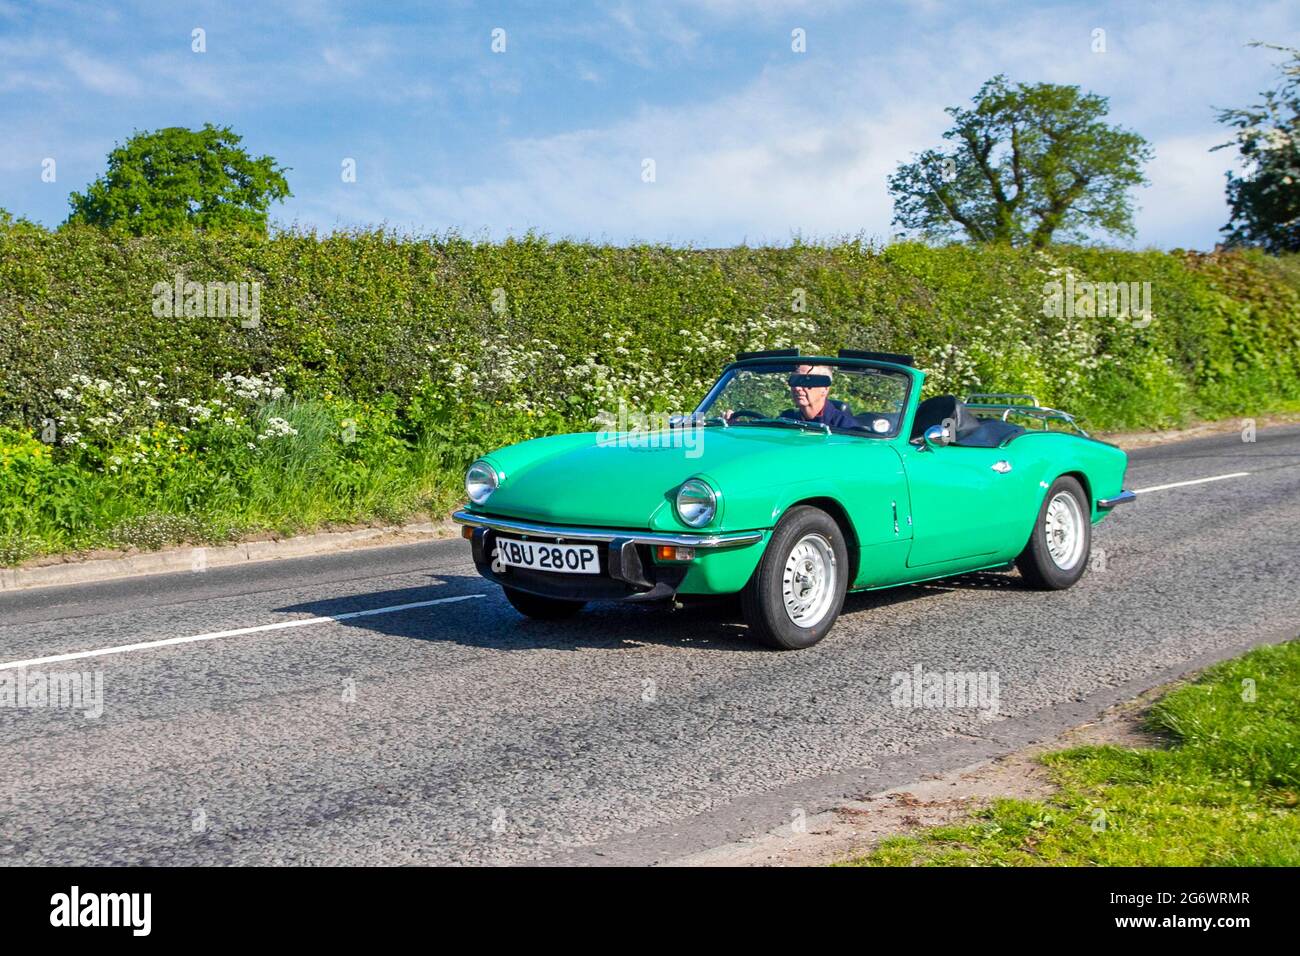 1975 70s green Triumph Spitfire 1403cc petrol cabrio British front-engined, rear-wheel drive, two-passenger convertible, en-route to Capesthorne Hall classic May car show, Cheshire, UK Stock Photo